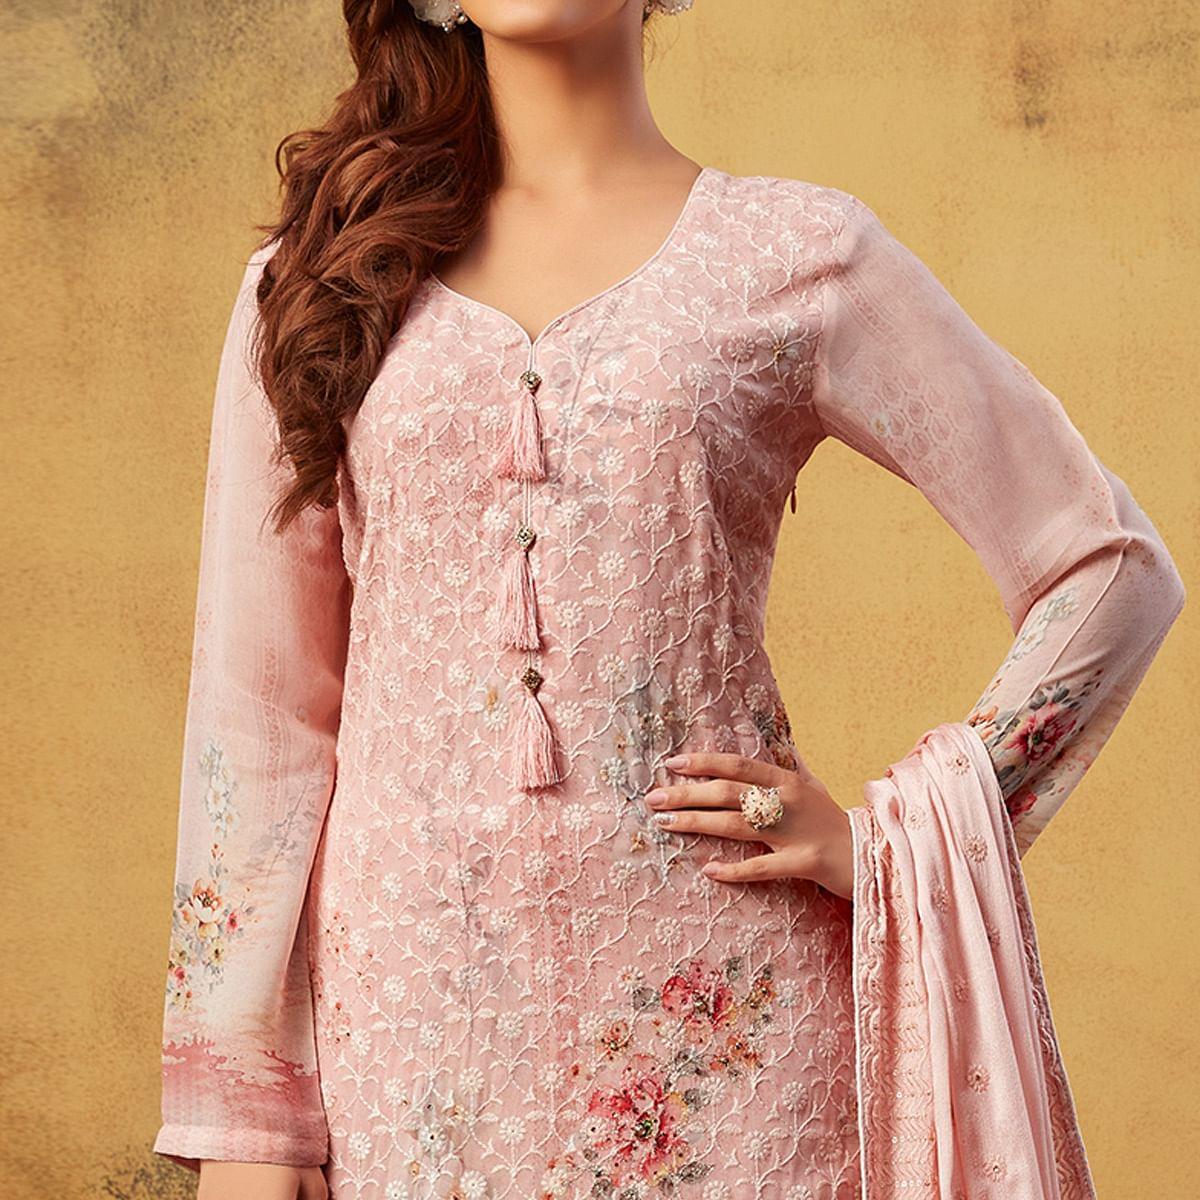 Eye-catching Peach Colored Embroidered With Digital Printed Partywear Viscose Bemberg Georgette Palazzo Suit - Peachmode